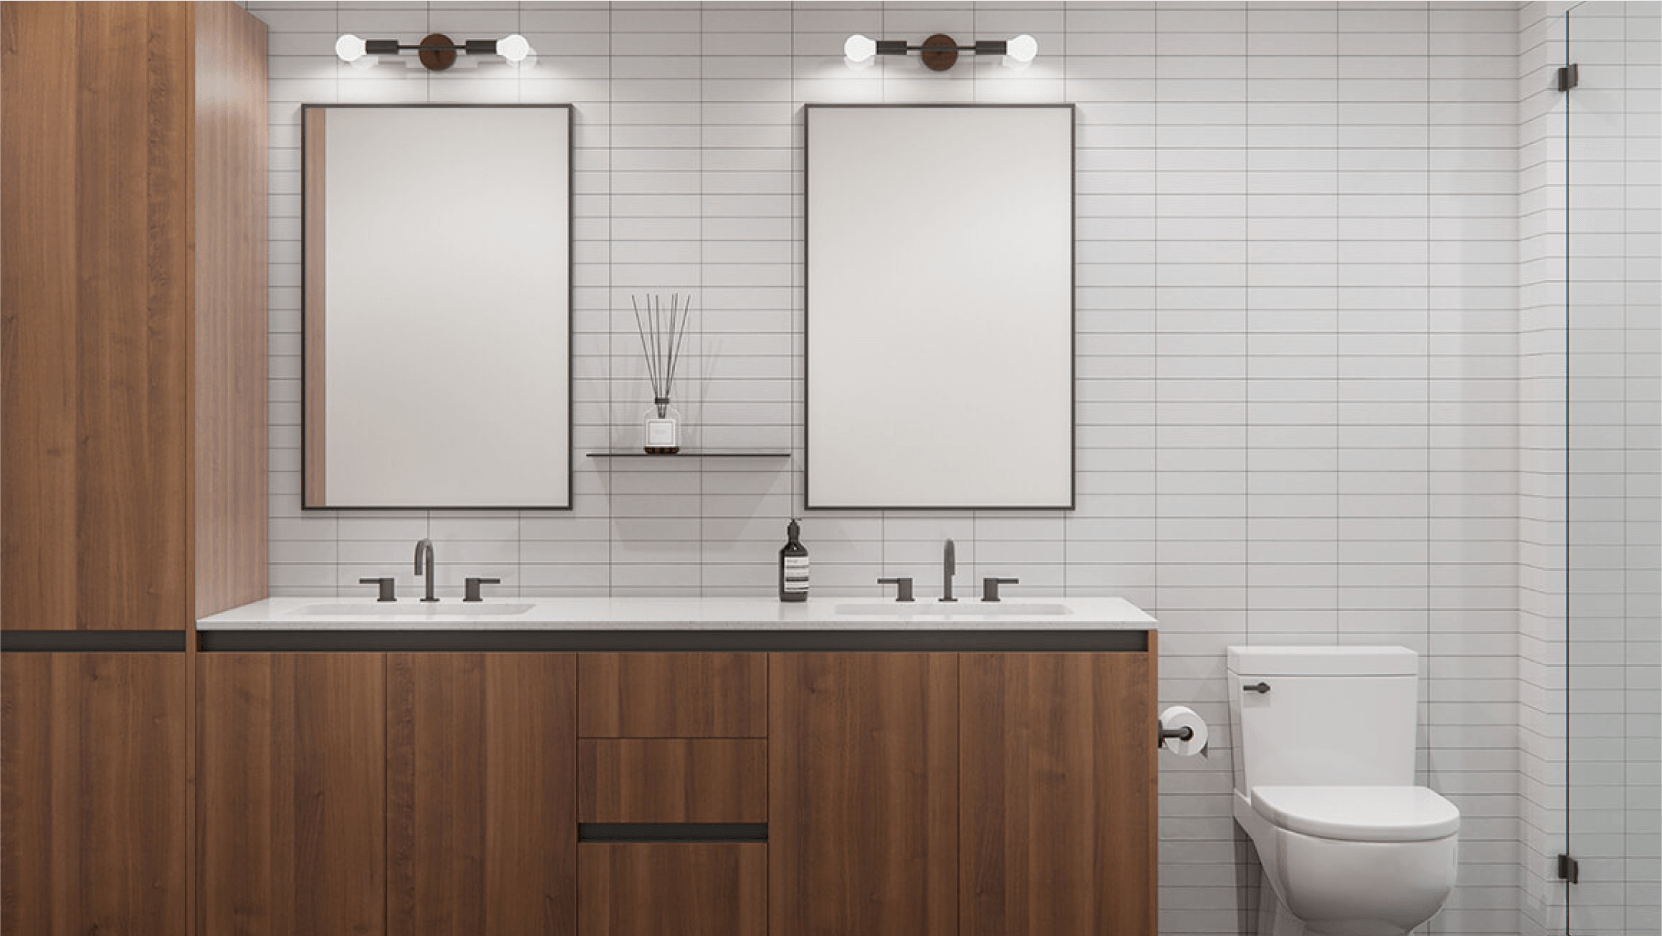 Sleek and modern bathroom at Vesper ATX, showcasing a double vanity with wood finishes, large mirrors, and white subway tiles.